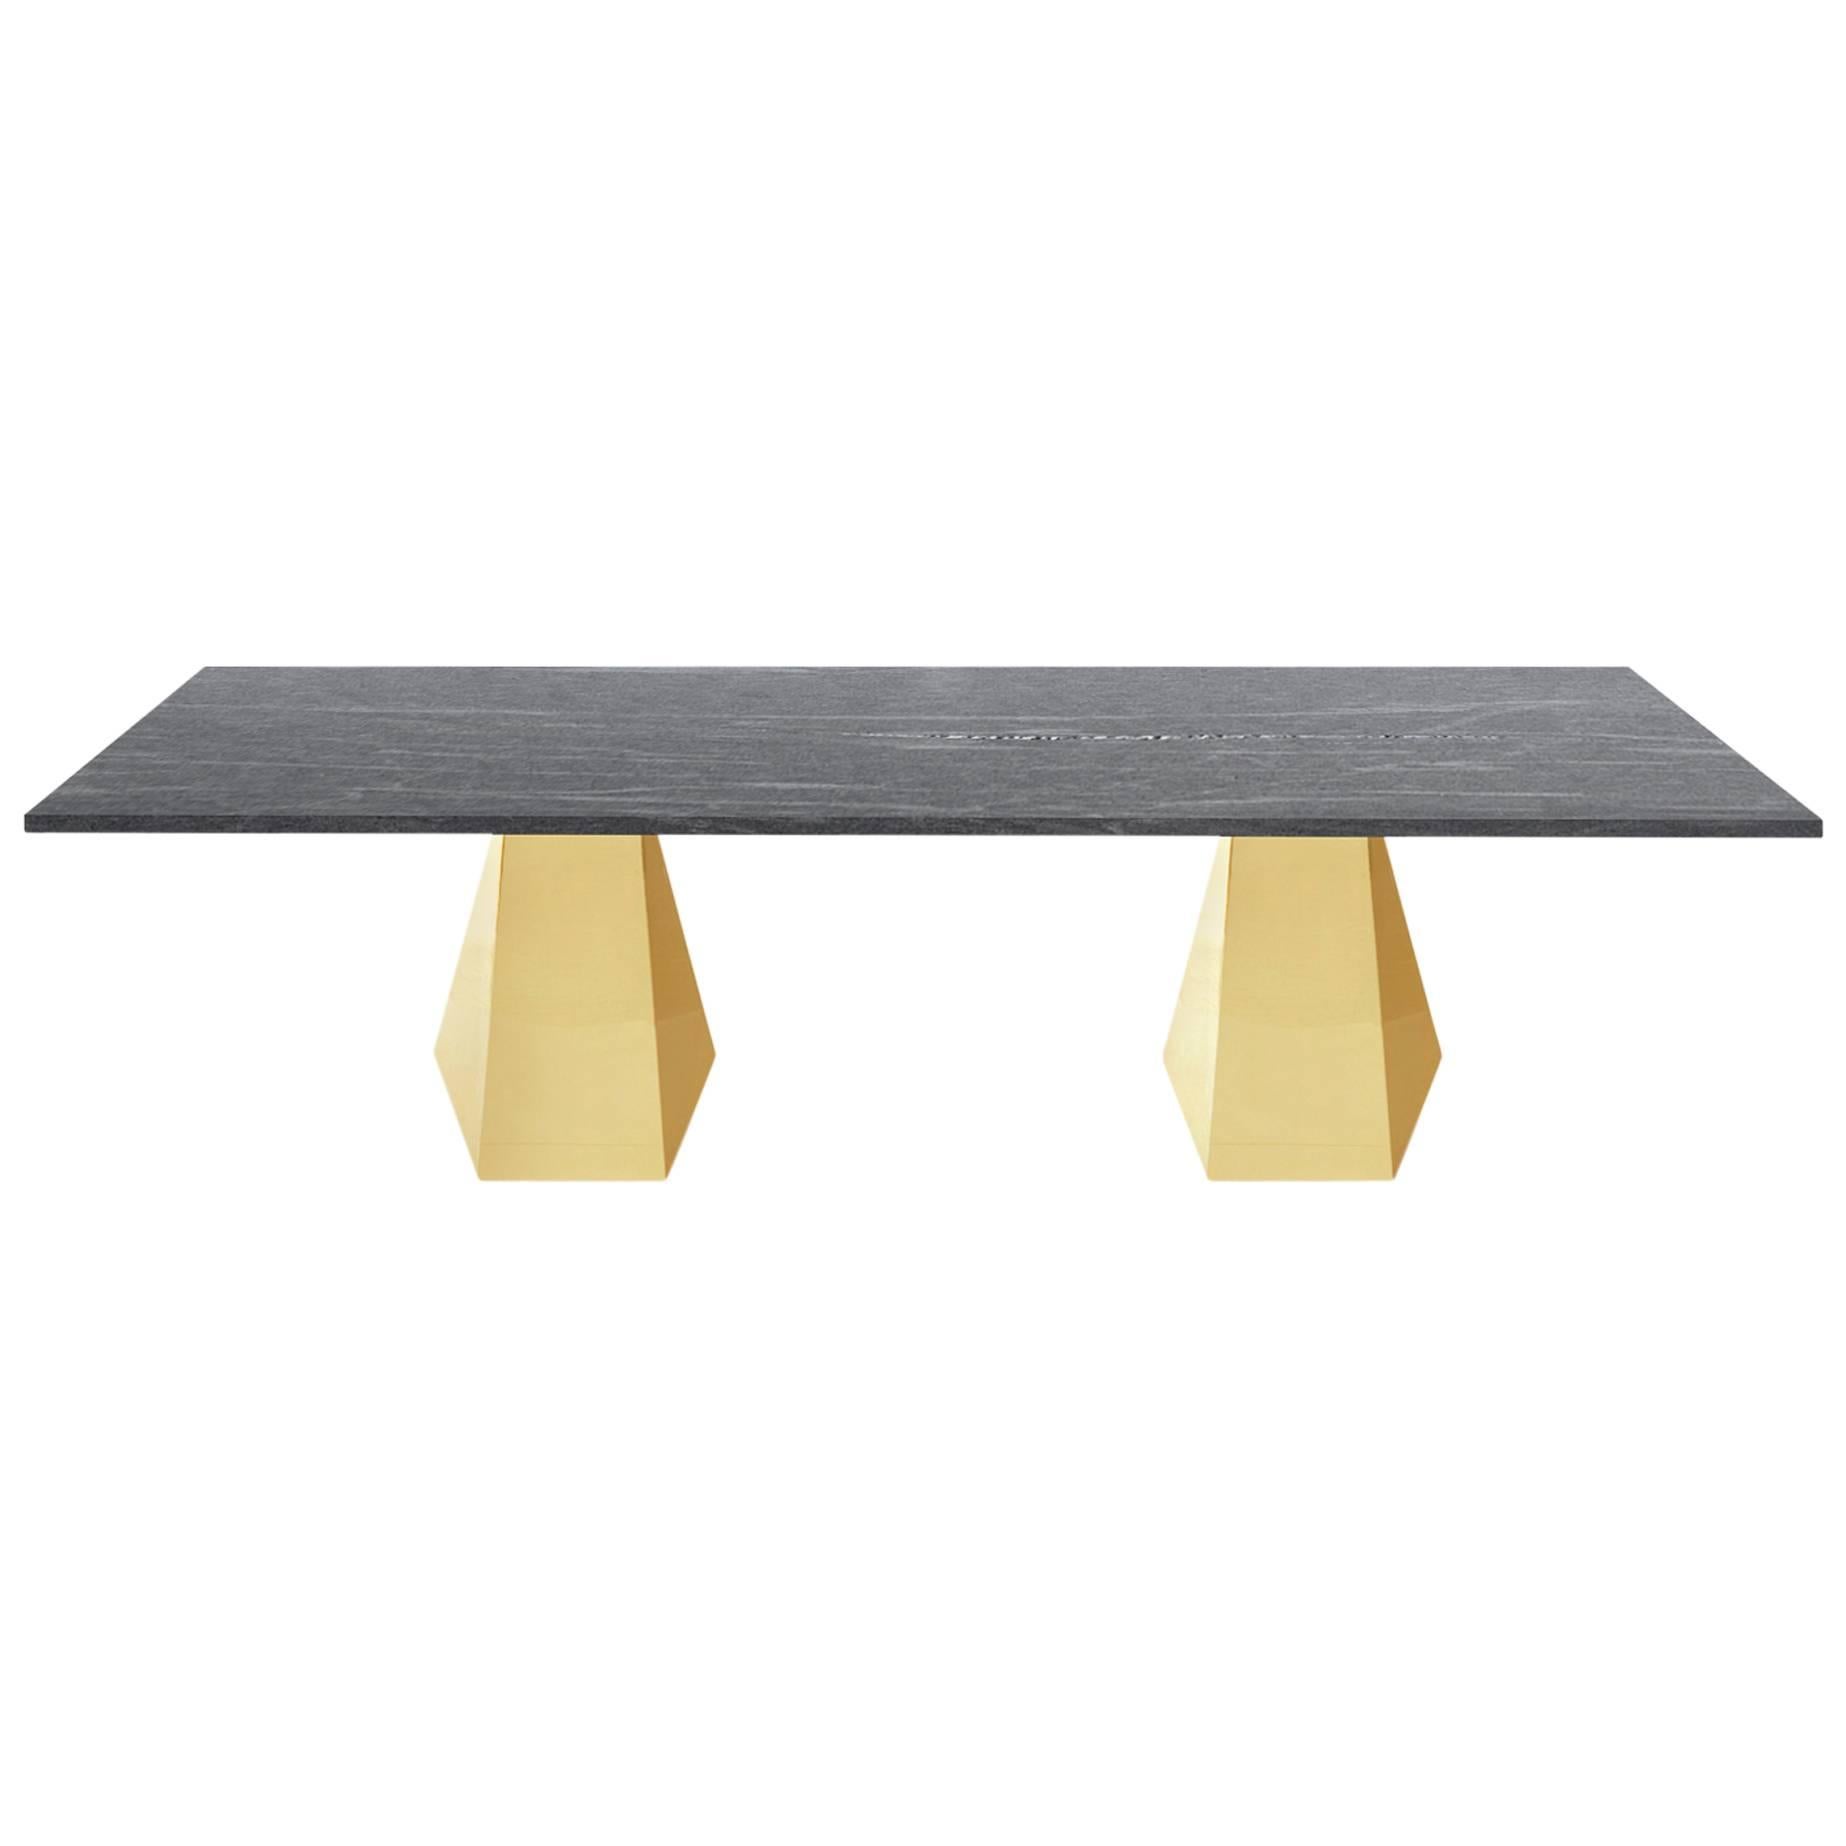 Double Pedestal Oscar Dining Table, Brass and Stone im Angebot